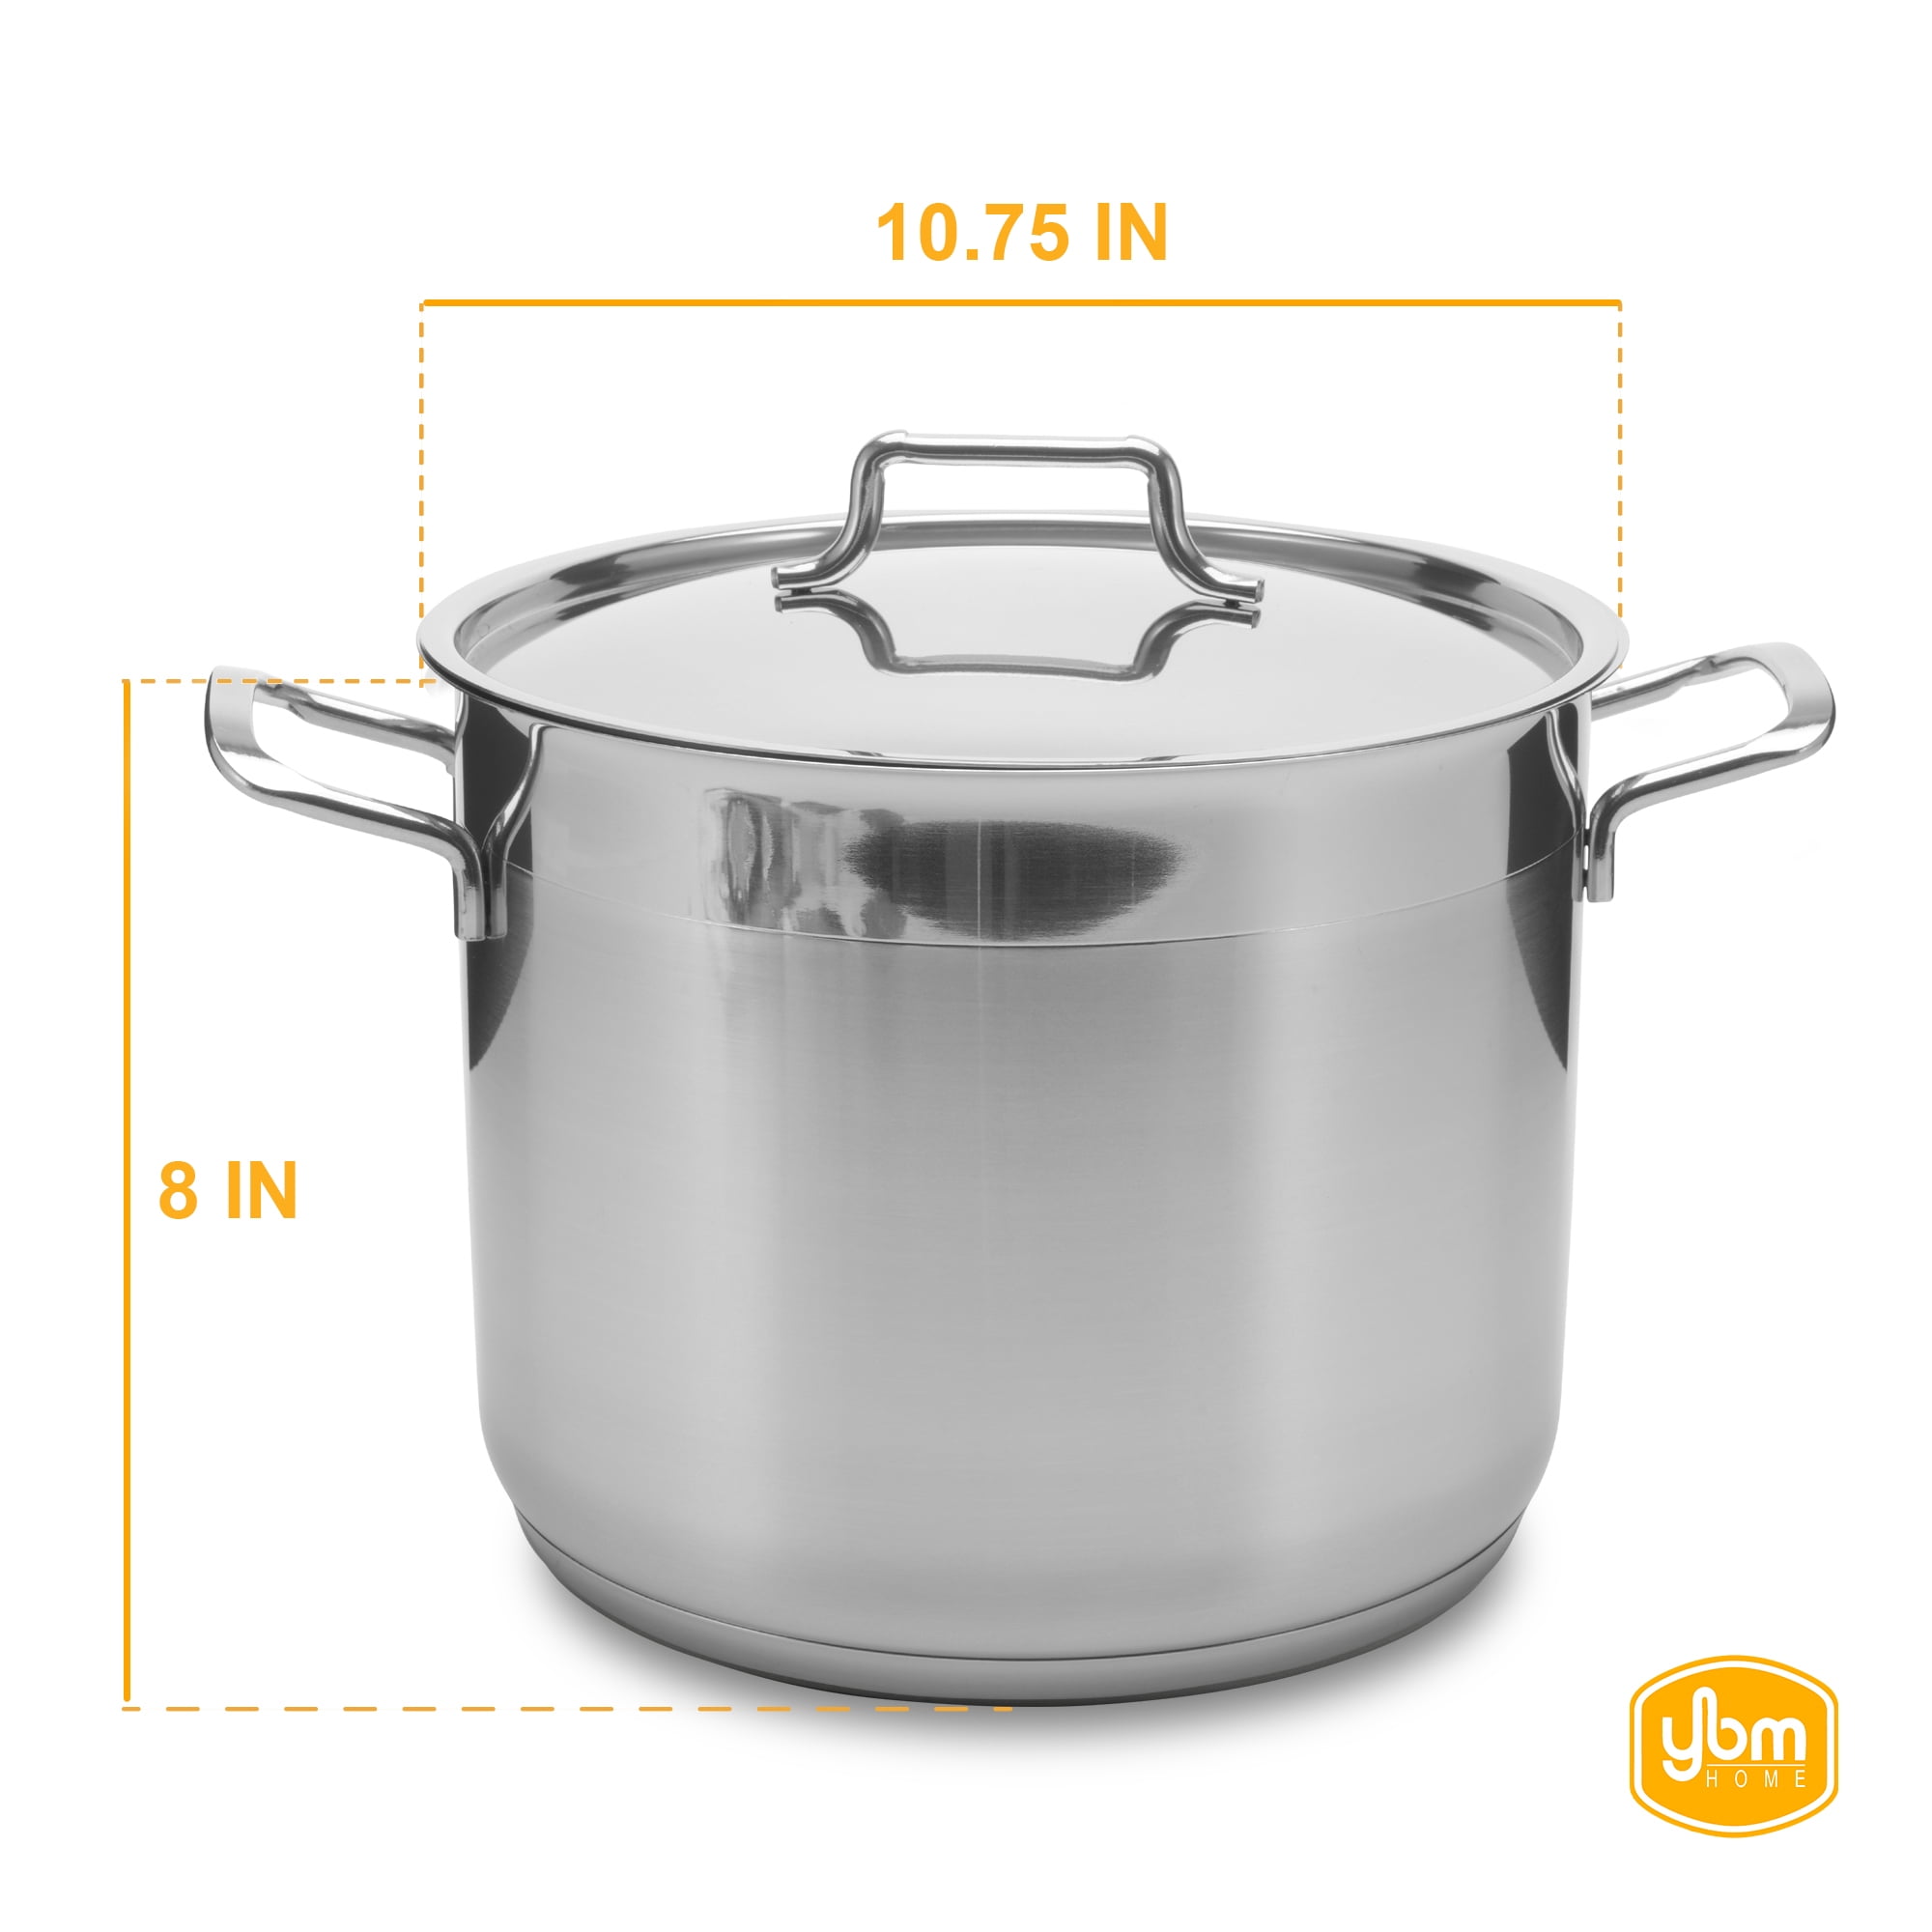 Gourmet Chef 8-Quart Stainless Steel Stock Pot with Glass Lid